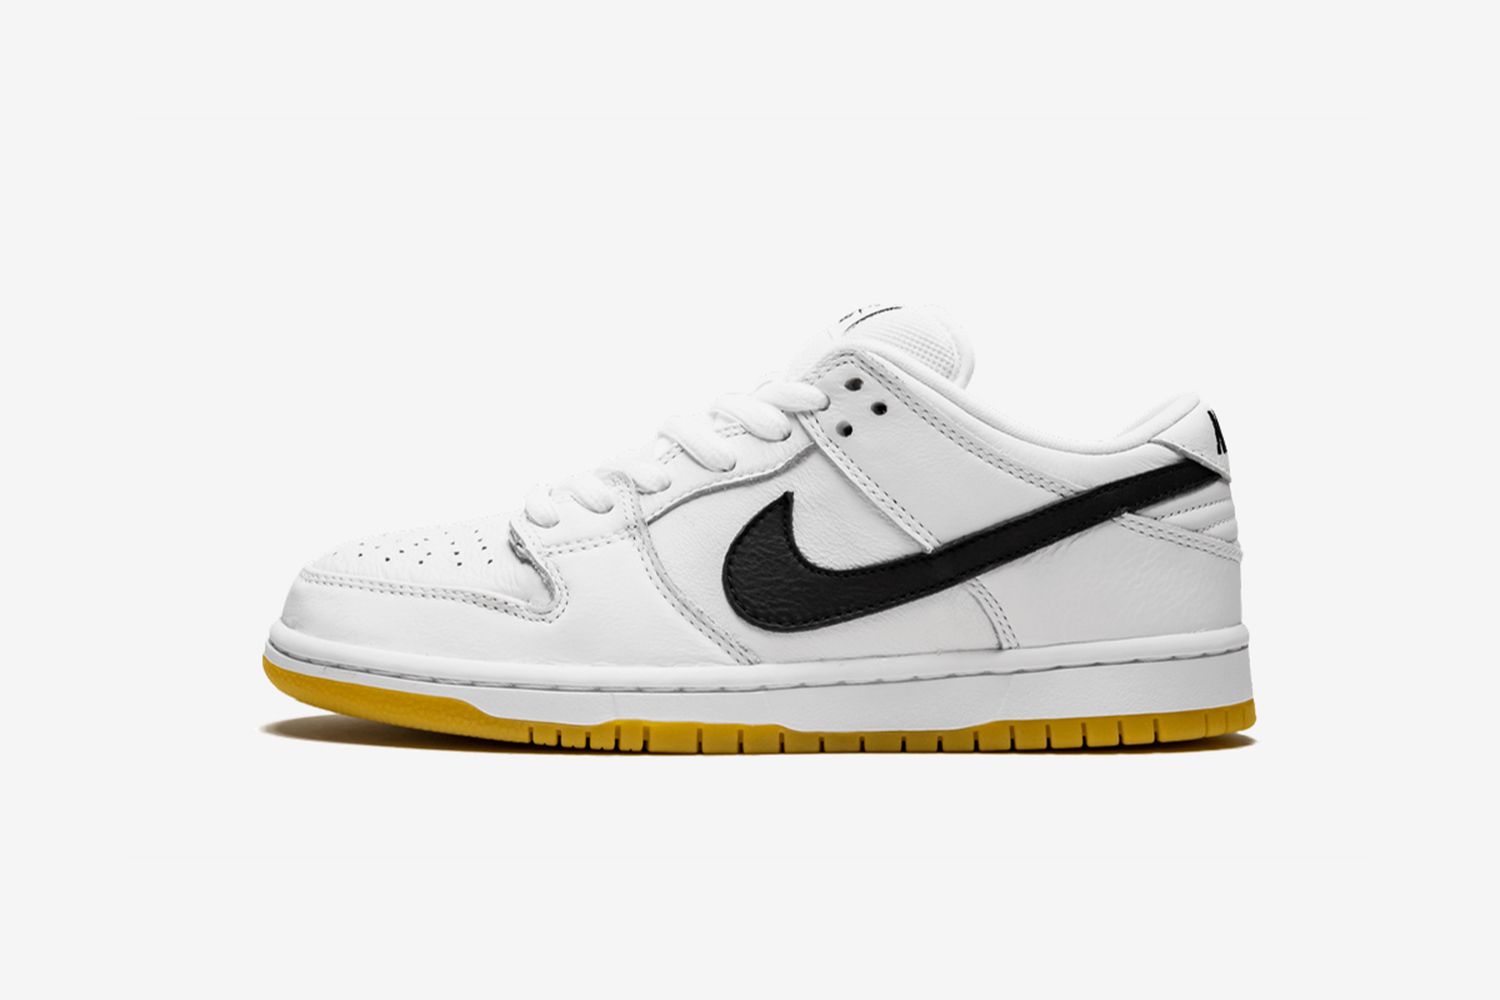 13 of Best Nike SB Dunks Reselling for $300